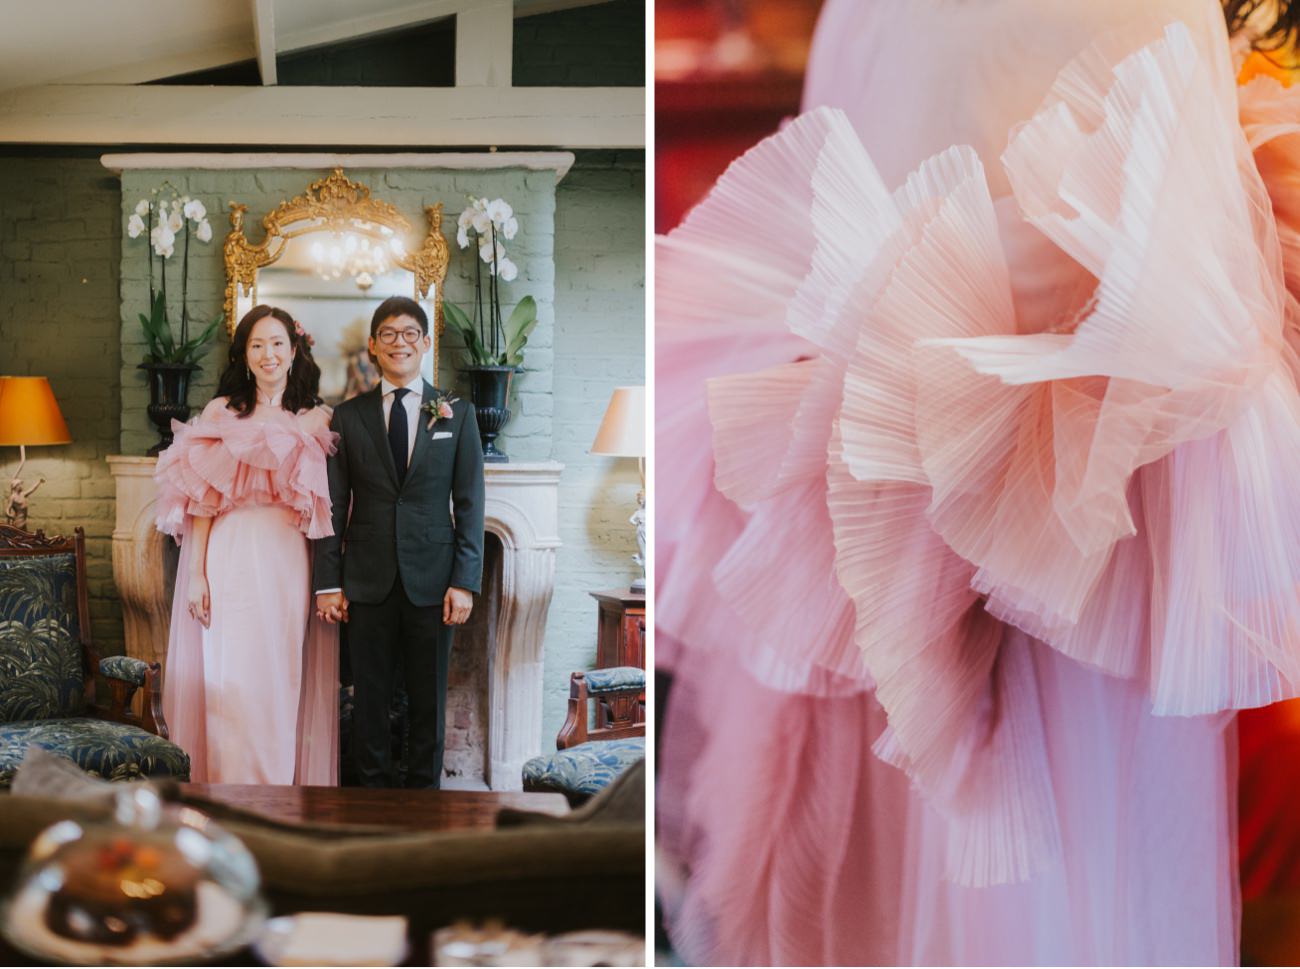 Bride wears Pink Froufrou dress with layers. The couple stand infant of fireplace in wedding outfits